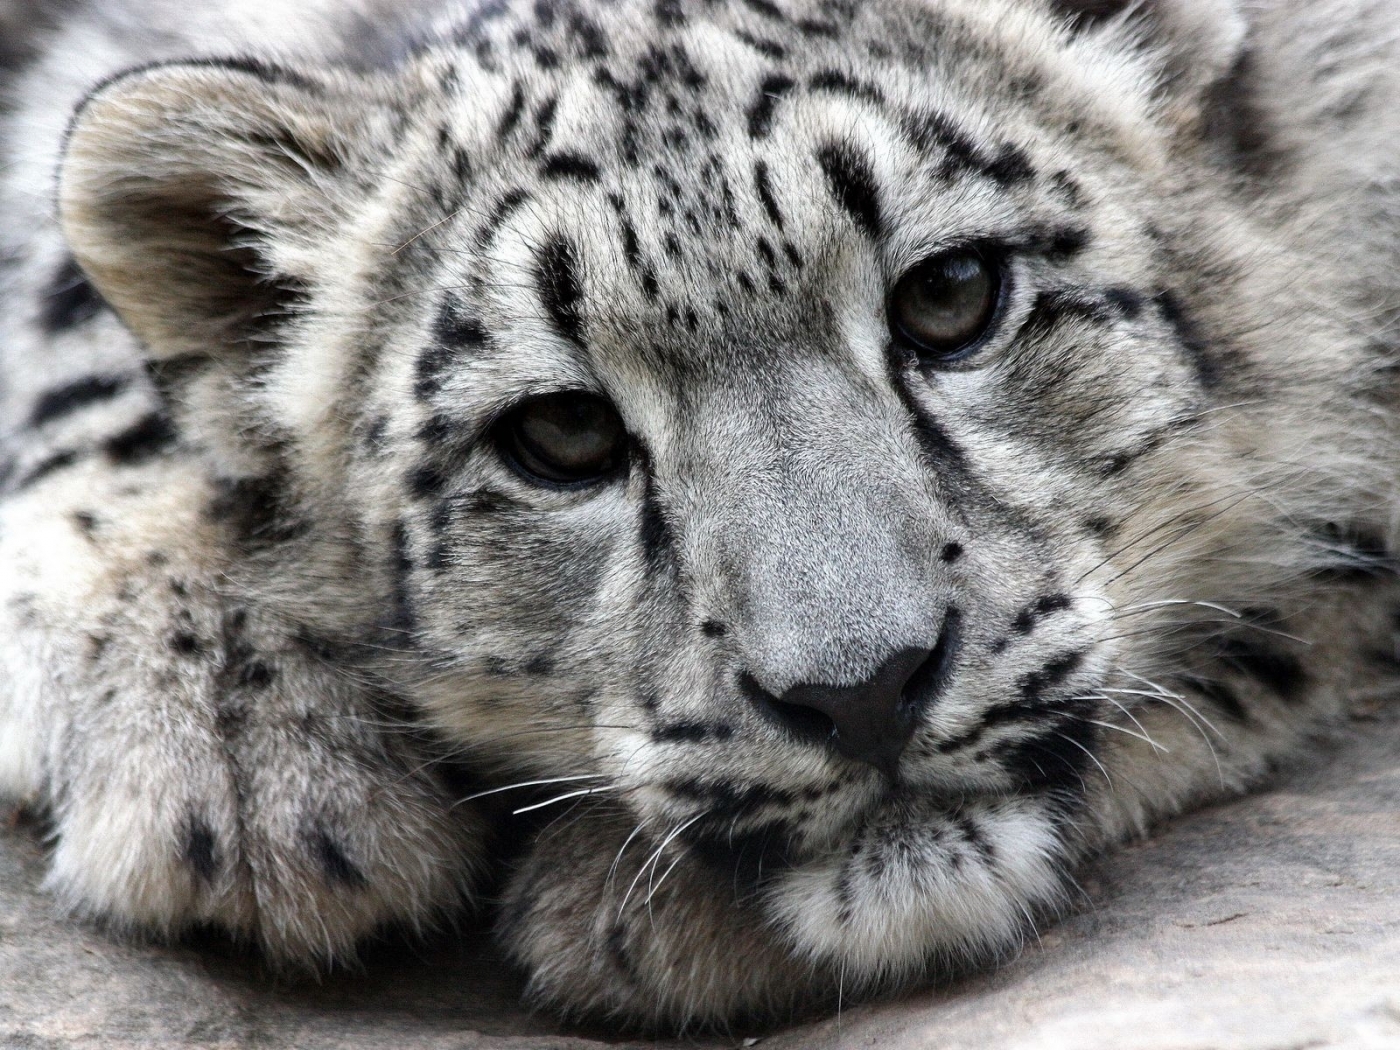 28551 download wallpaper snow leopard, animals, gray screensavers and pictures for free